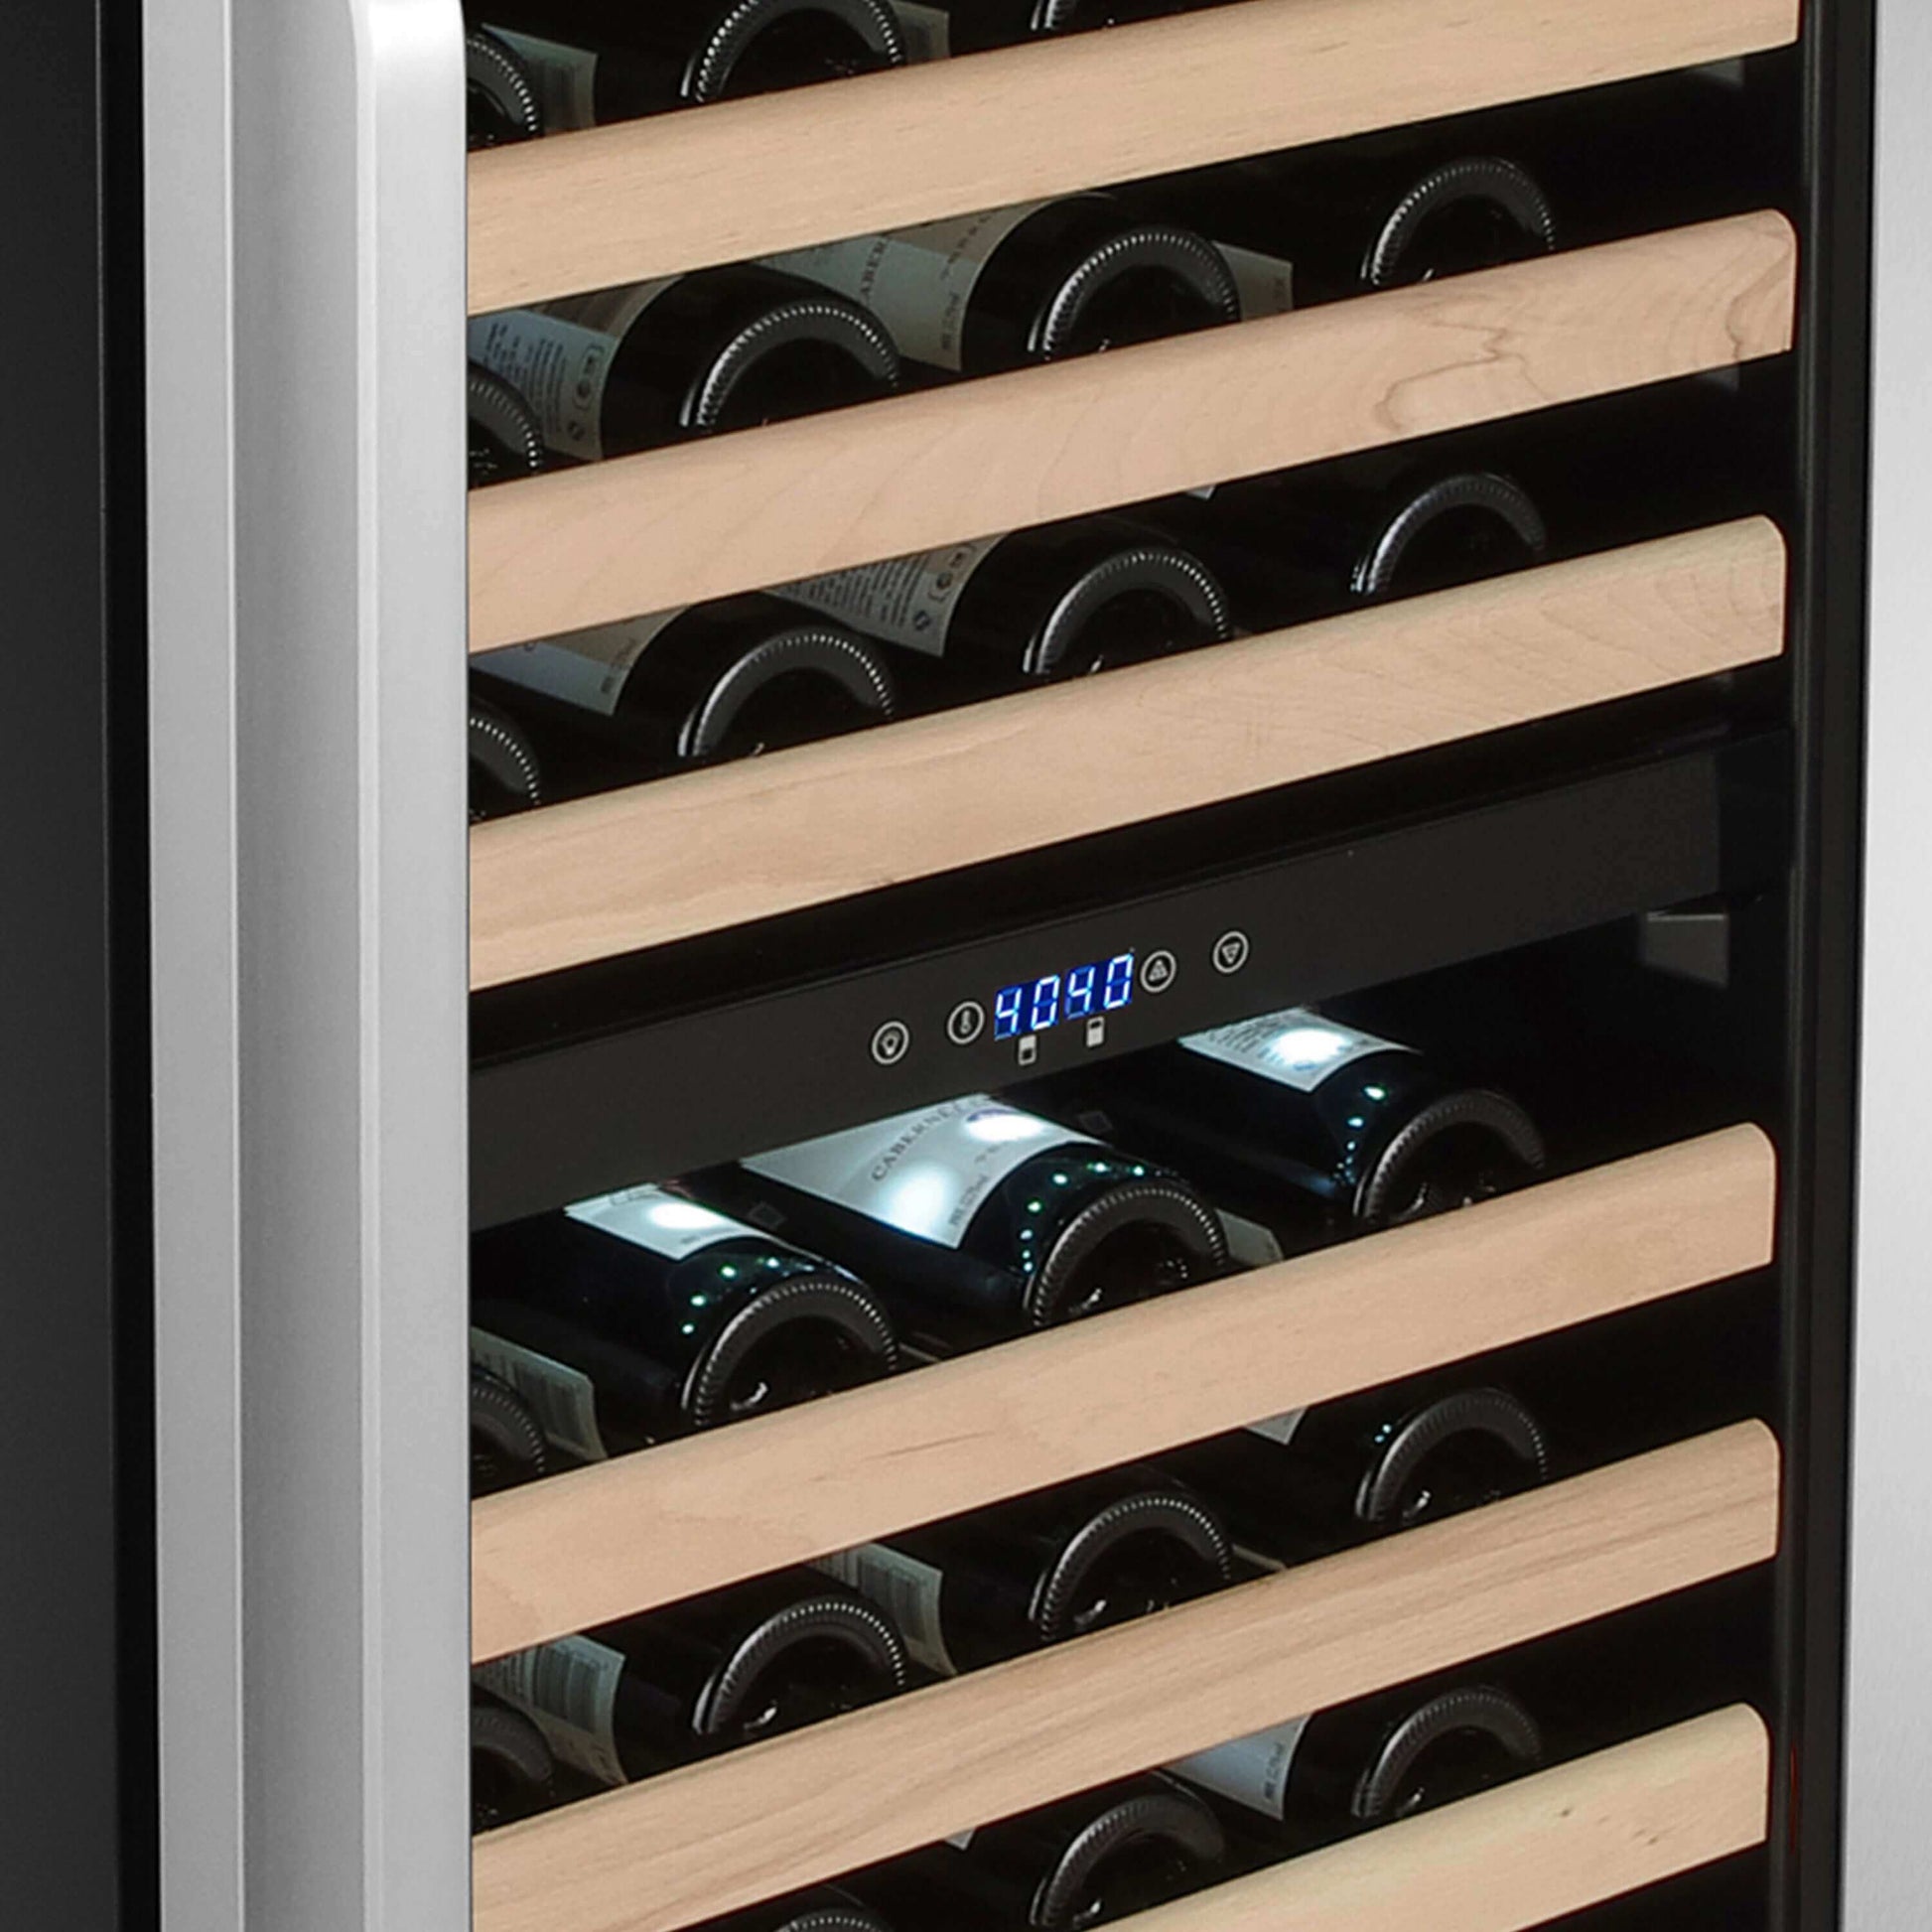 Whynter BWR-1642DZ/BWR-1642DZa 164 Bottle Built-in Stainless Steel Dual Zone Compressor Wine Refrigerator with Display Rack and LED display